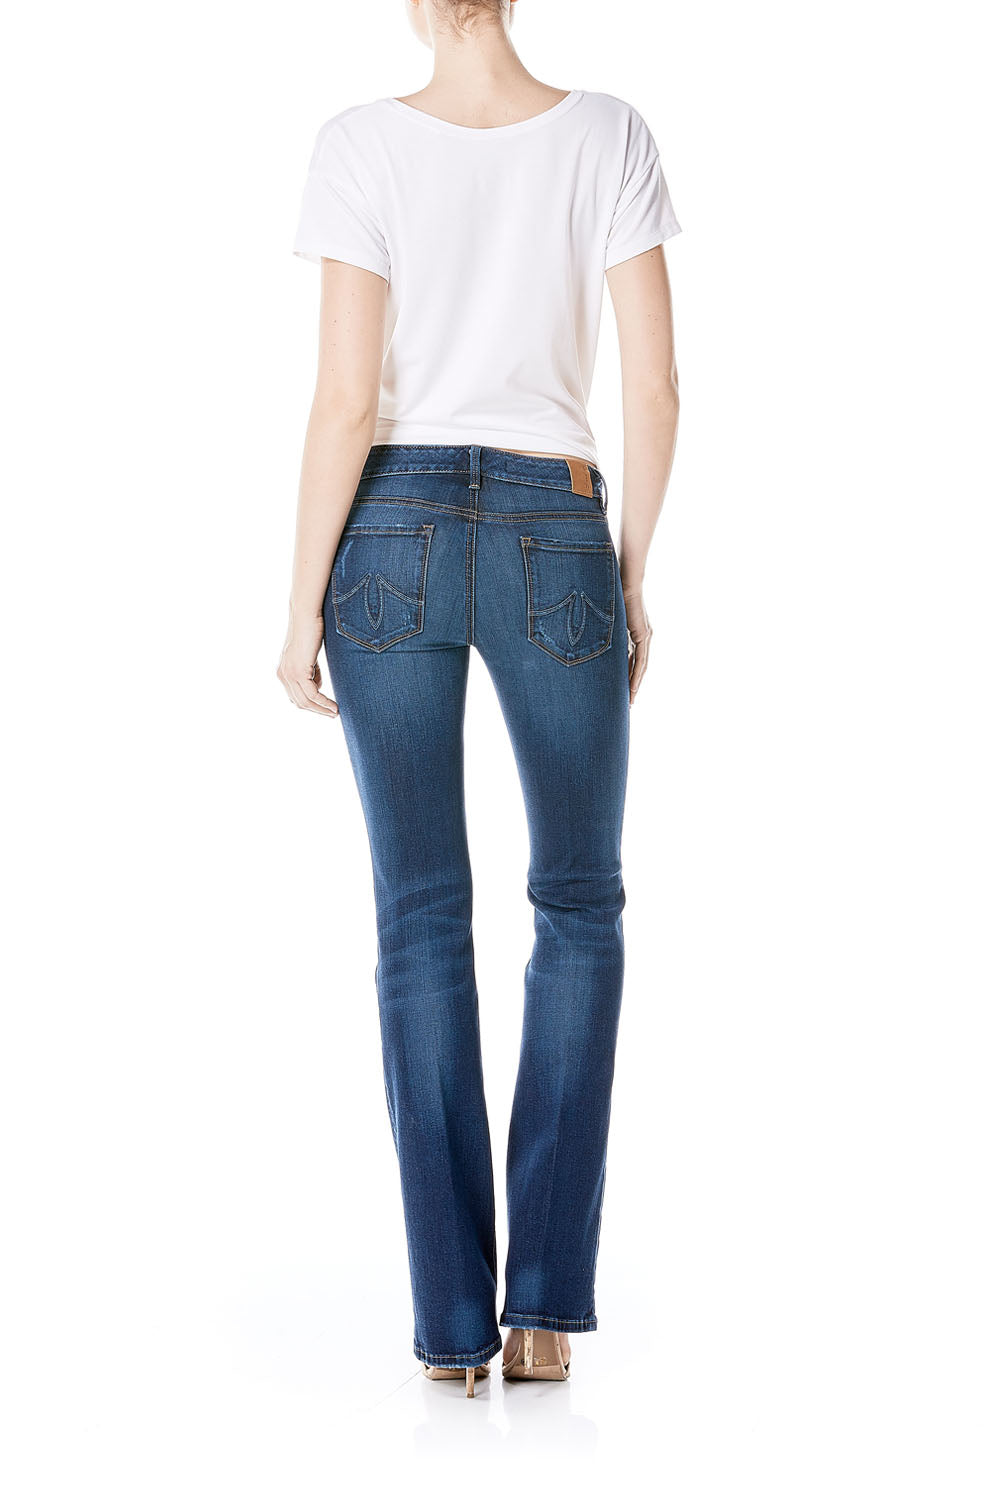 Level 99 Jeans | Chloe Boot – level99jeans